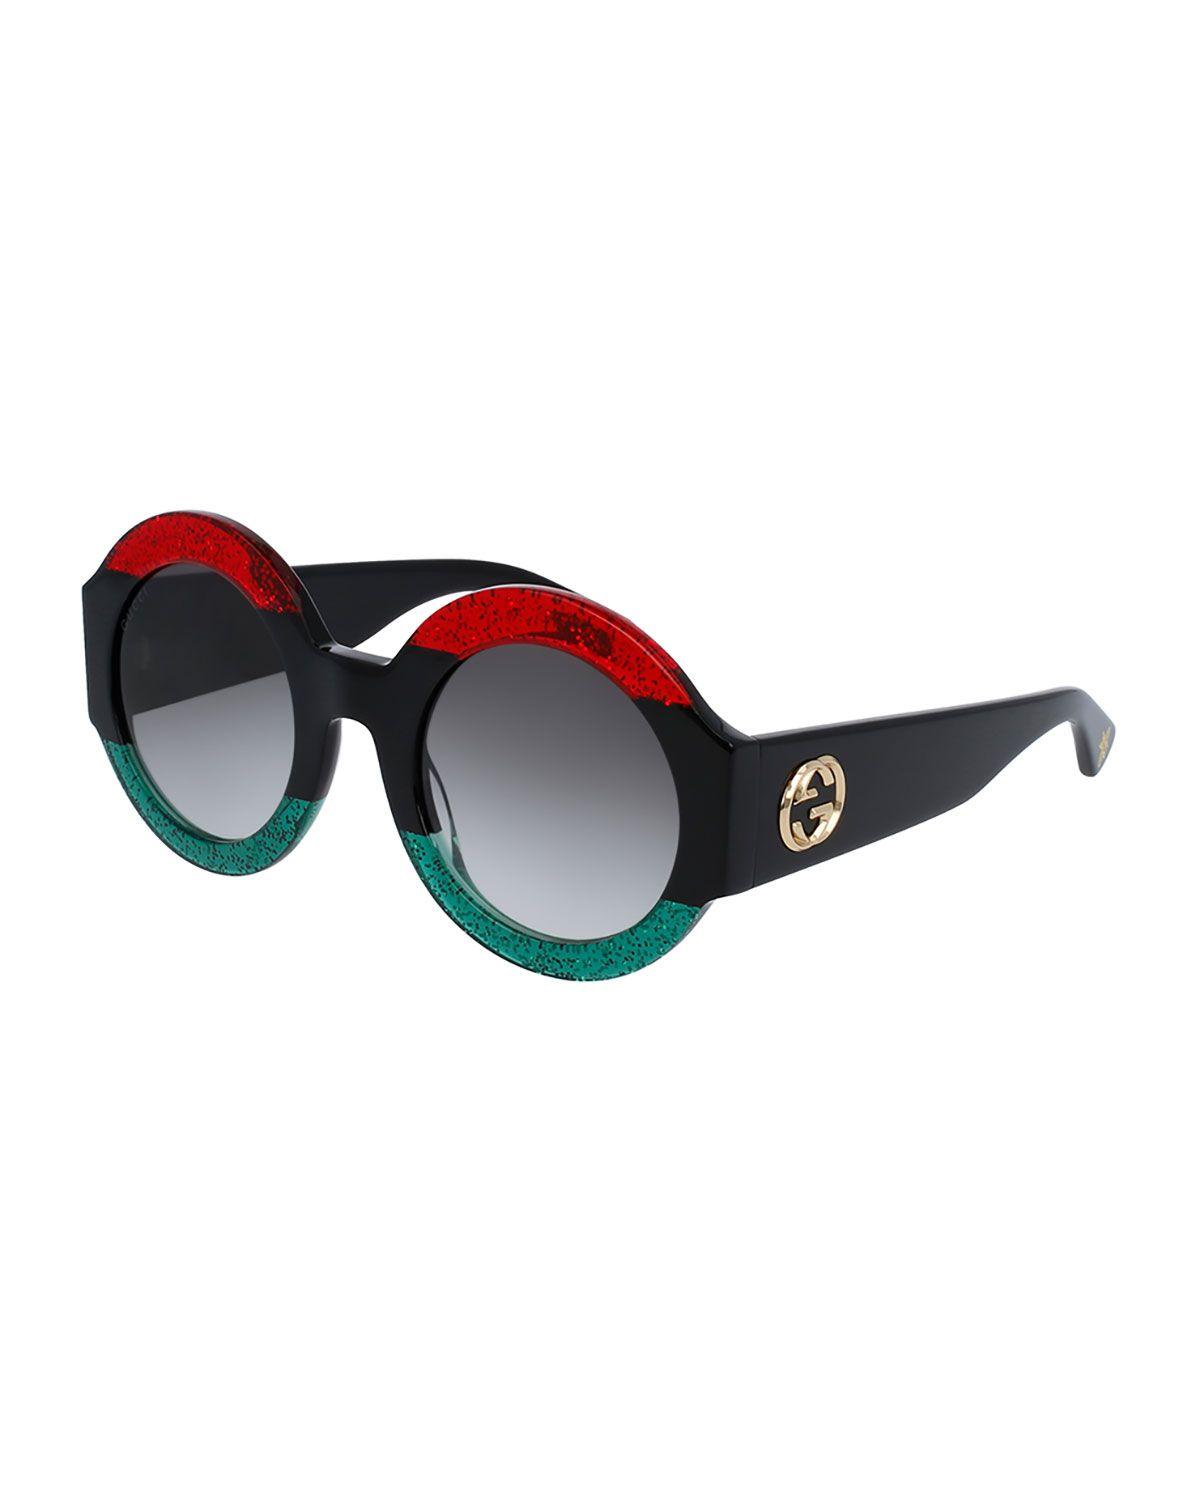 Red and Green Round Logo - Gucci Glittered Oversized Round Sunglasses, Red/Green/Black | Neiman ...